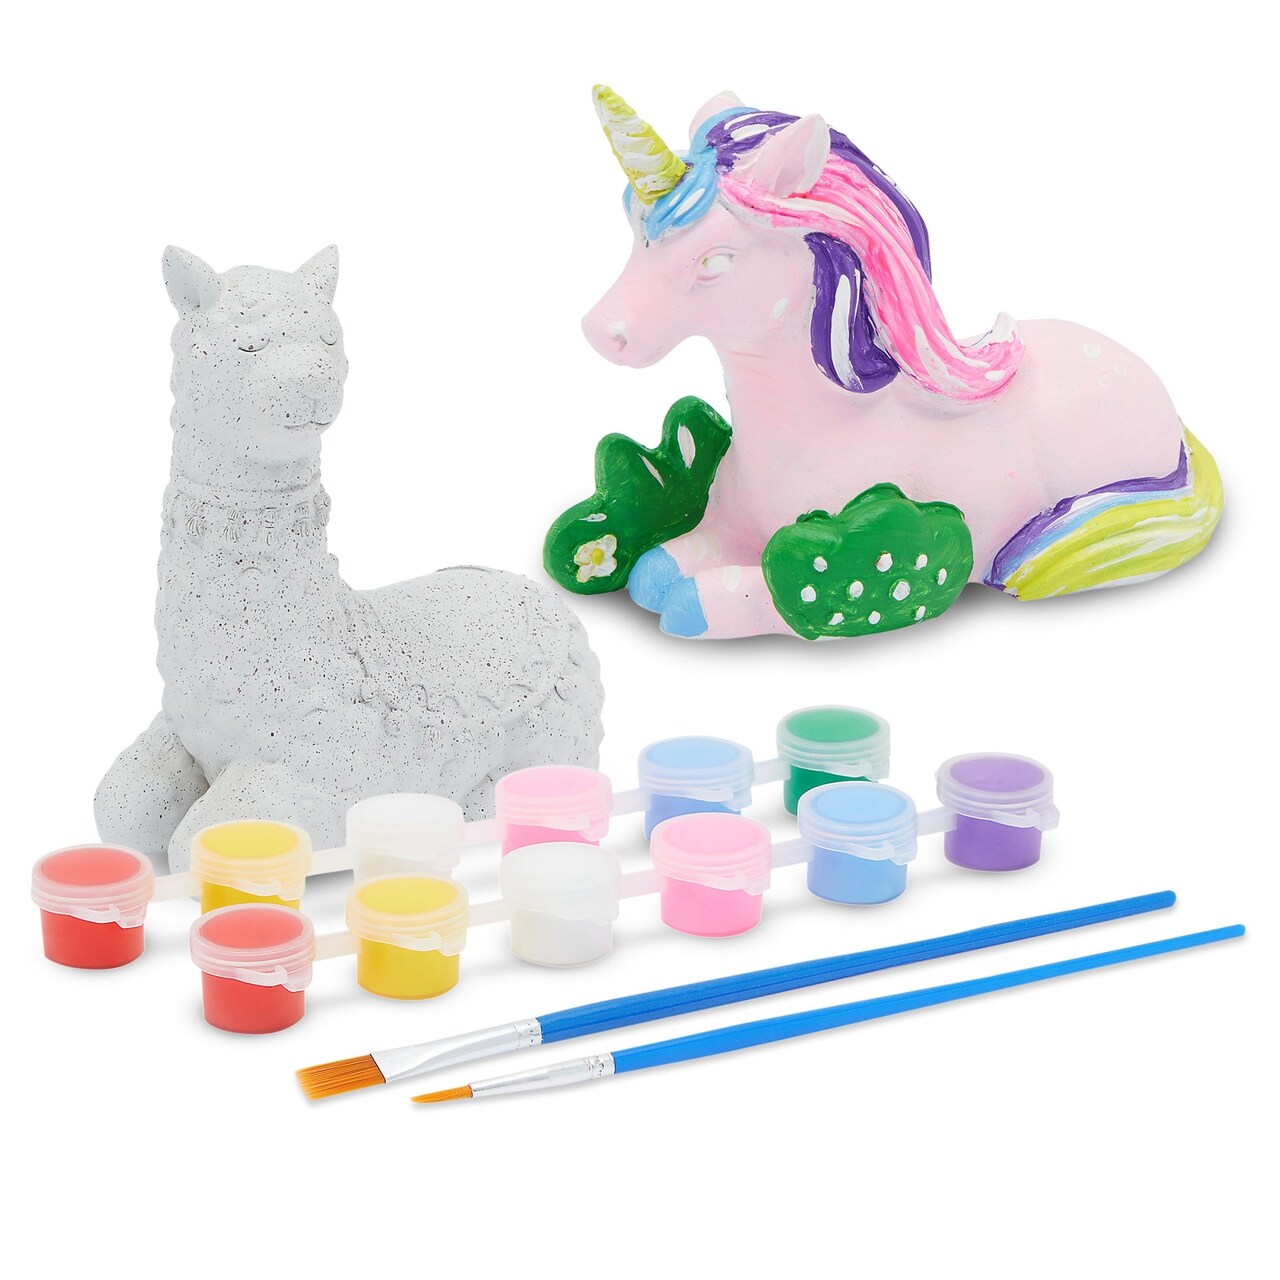 Unicorn and Llama Ceramic Painting Kit for Kids with 3ml Paint Pod Strips,  2 Brushes and 2 Figures